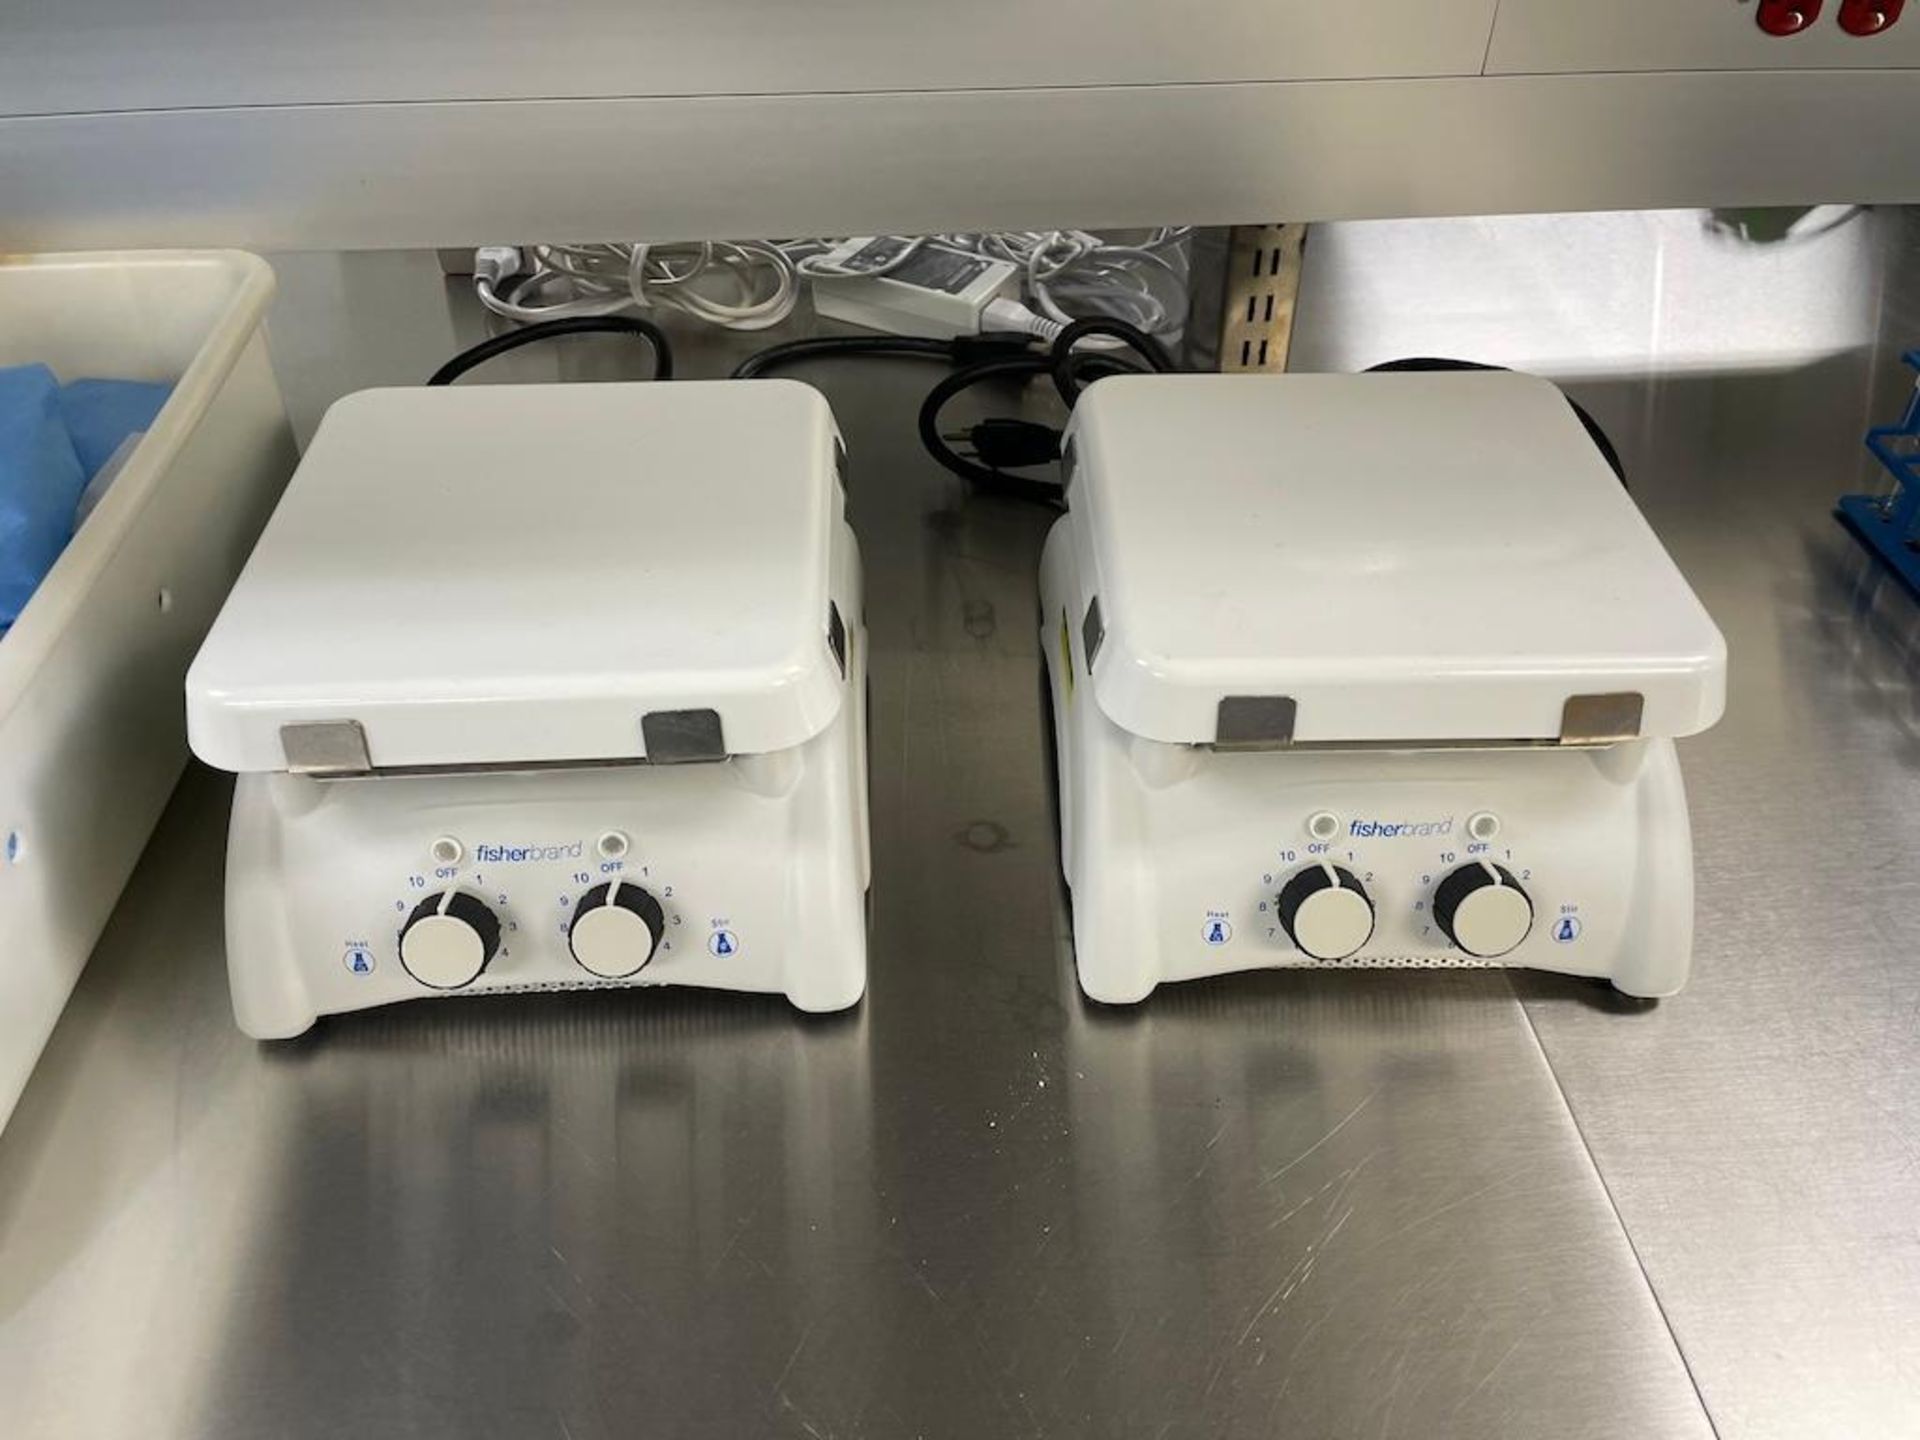 LOT 2 FISHER BRAND HEAT AND STIR PLATES [LAB AREA A]